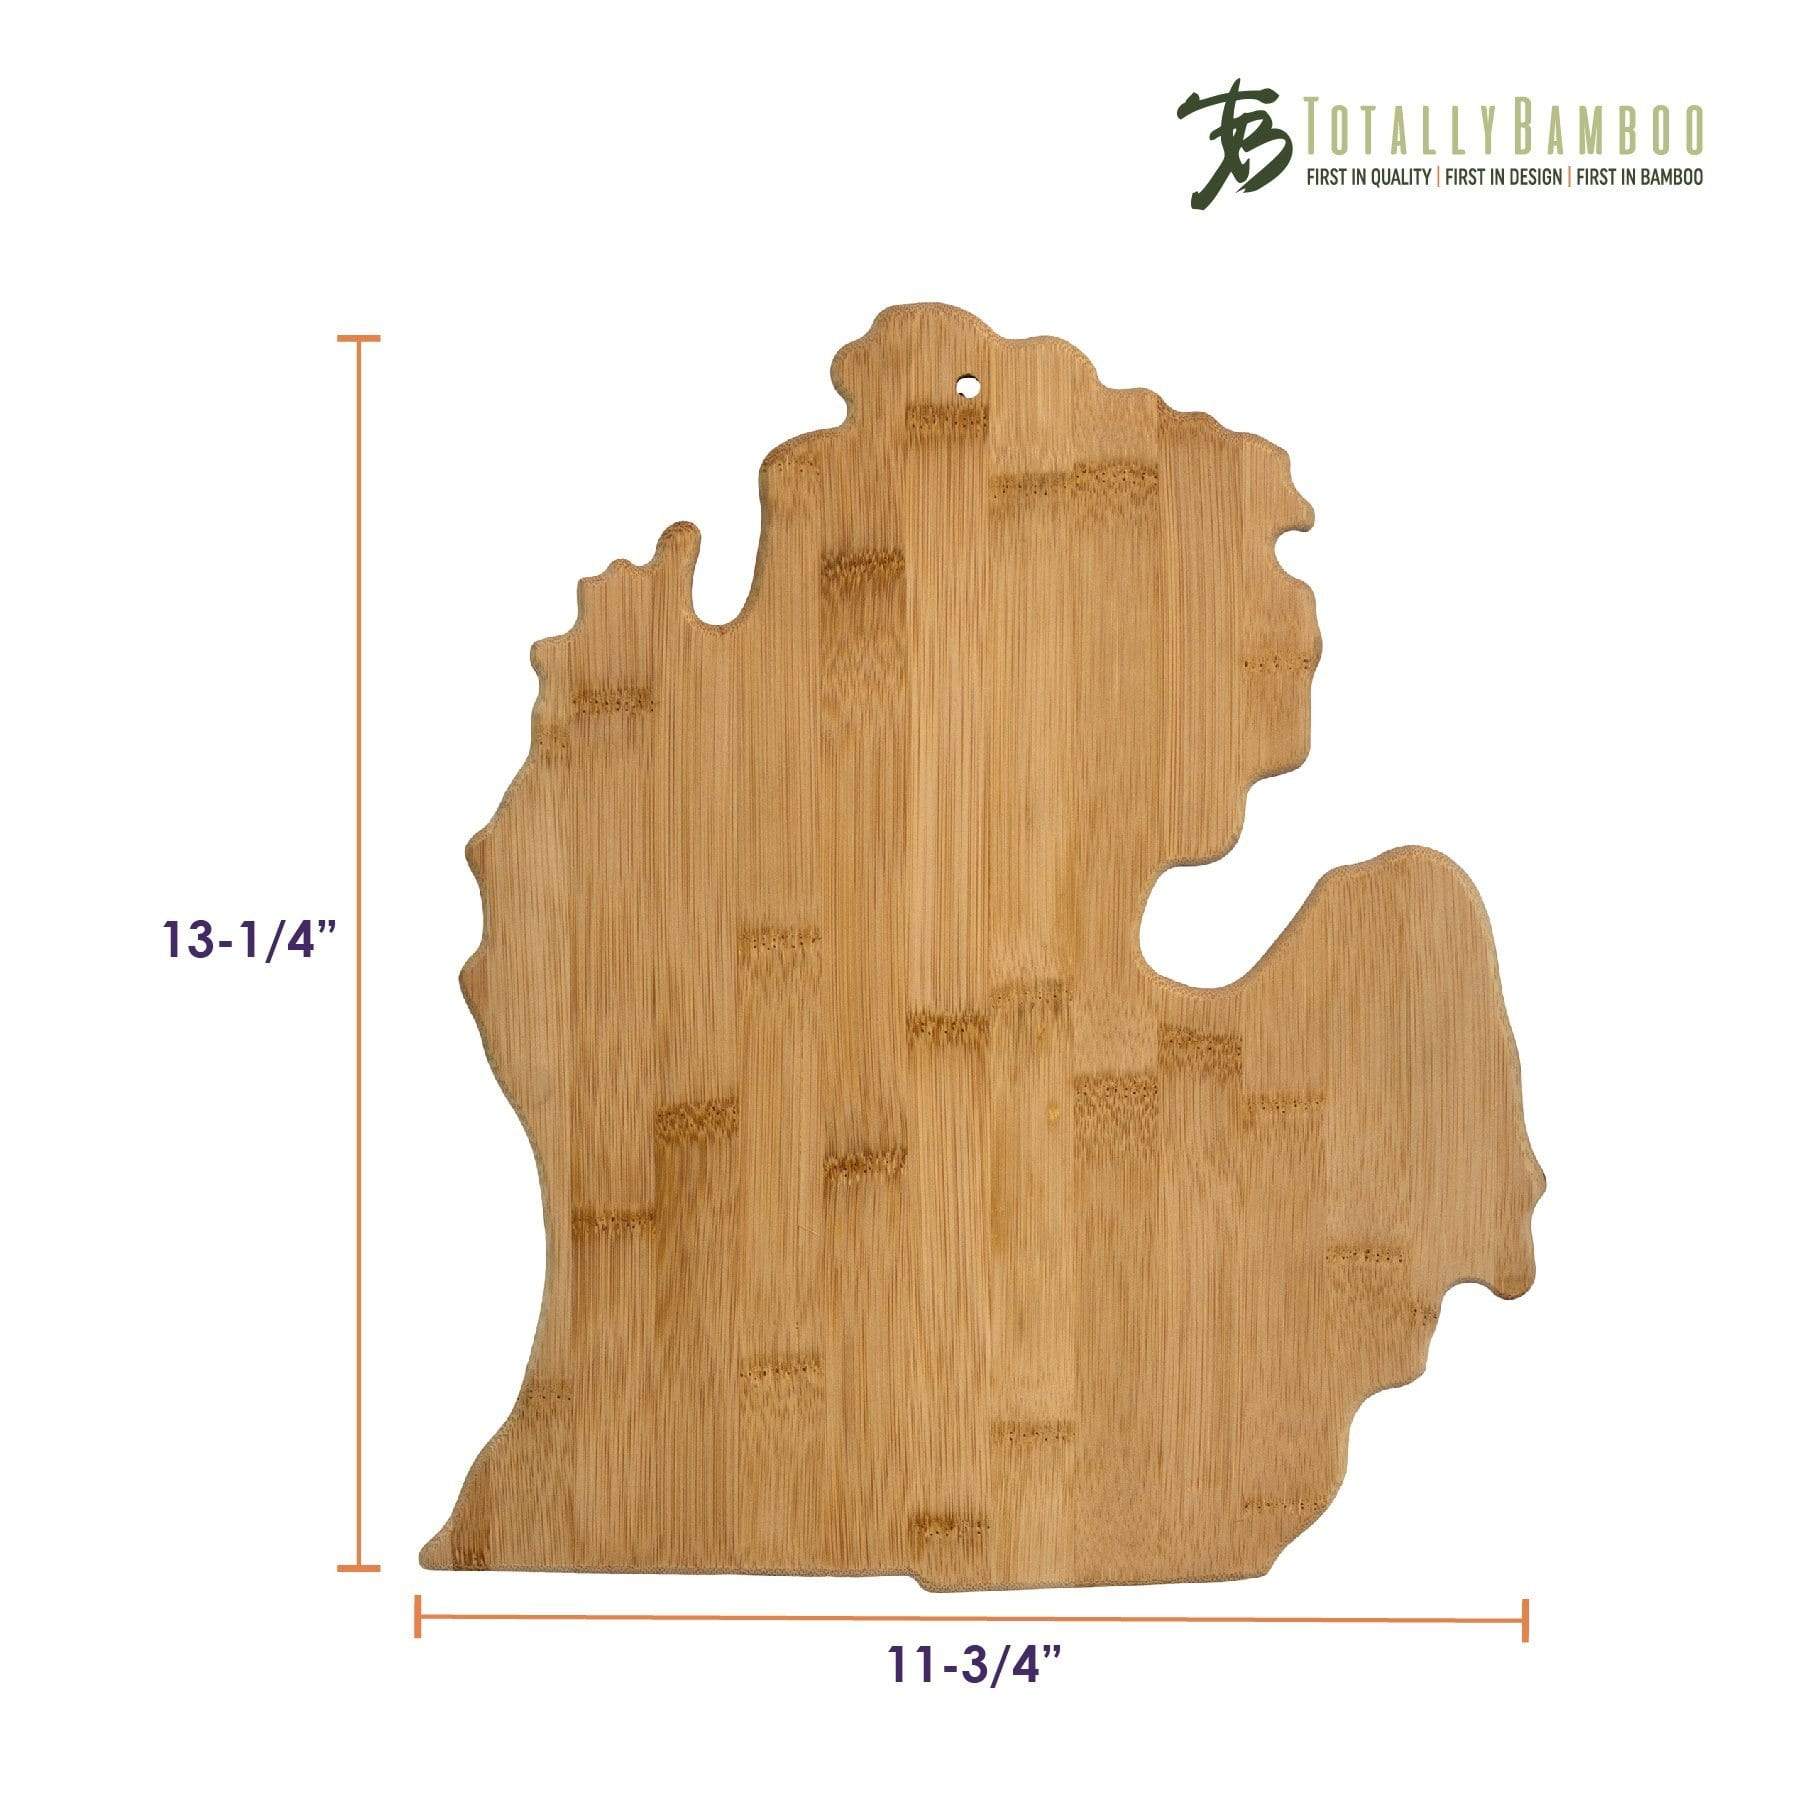 Totally Bamboo Michigan State Shaped Bamboo Serving and Cutting Board